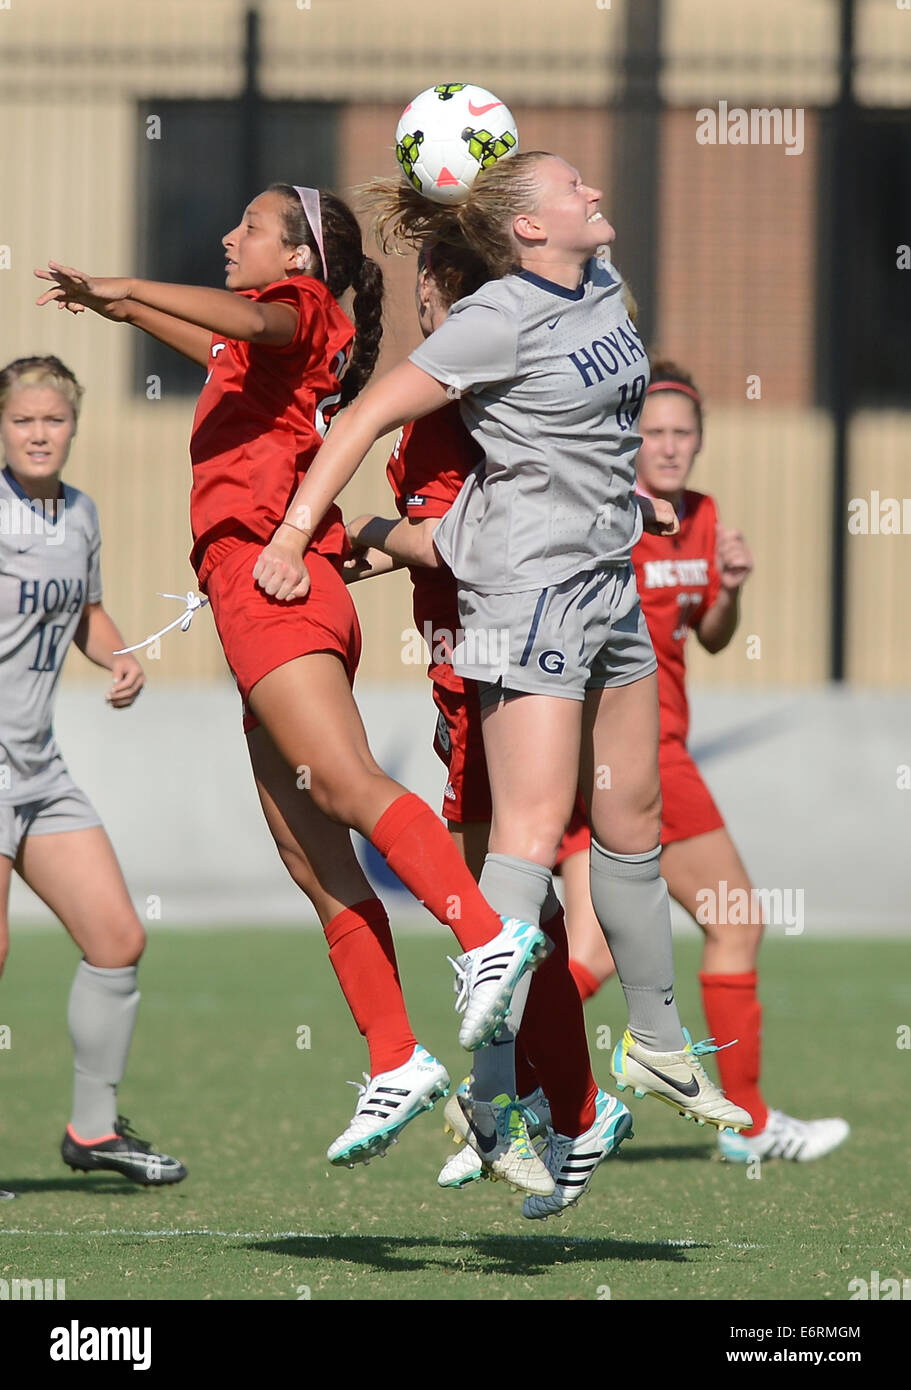 Washington, DC, USA. 29th Aug, 2014. 20140829 - Georgetown forward Ashley Shaffer (19) battles for a head ball with North Carolina State forward Caroline Gentry (25), left, and North Carolina State defender Cailyn Boch (22), back, in the second half at Shaw Field in Washington. Georgetown defeated N.C. State, 6-0. © Chuck Myers/ZUMA Wire/Alamy Live News Stock Photo